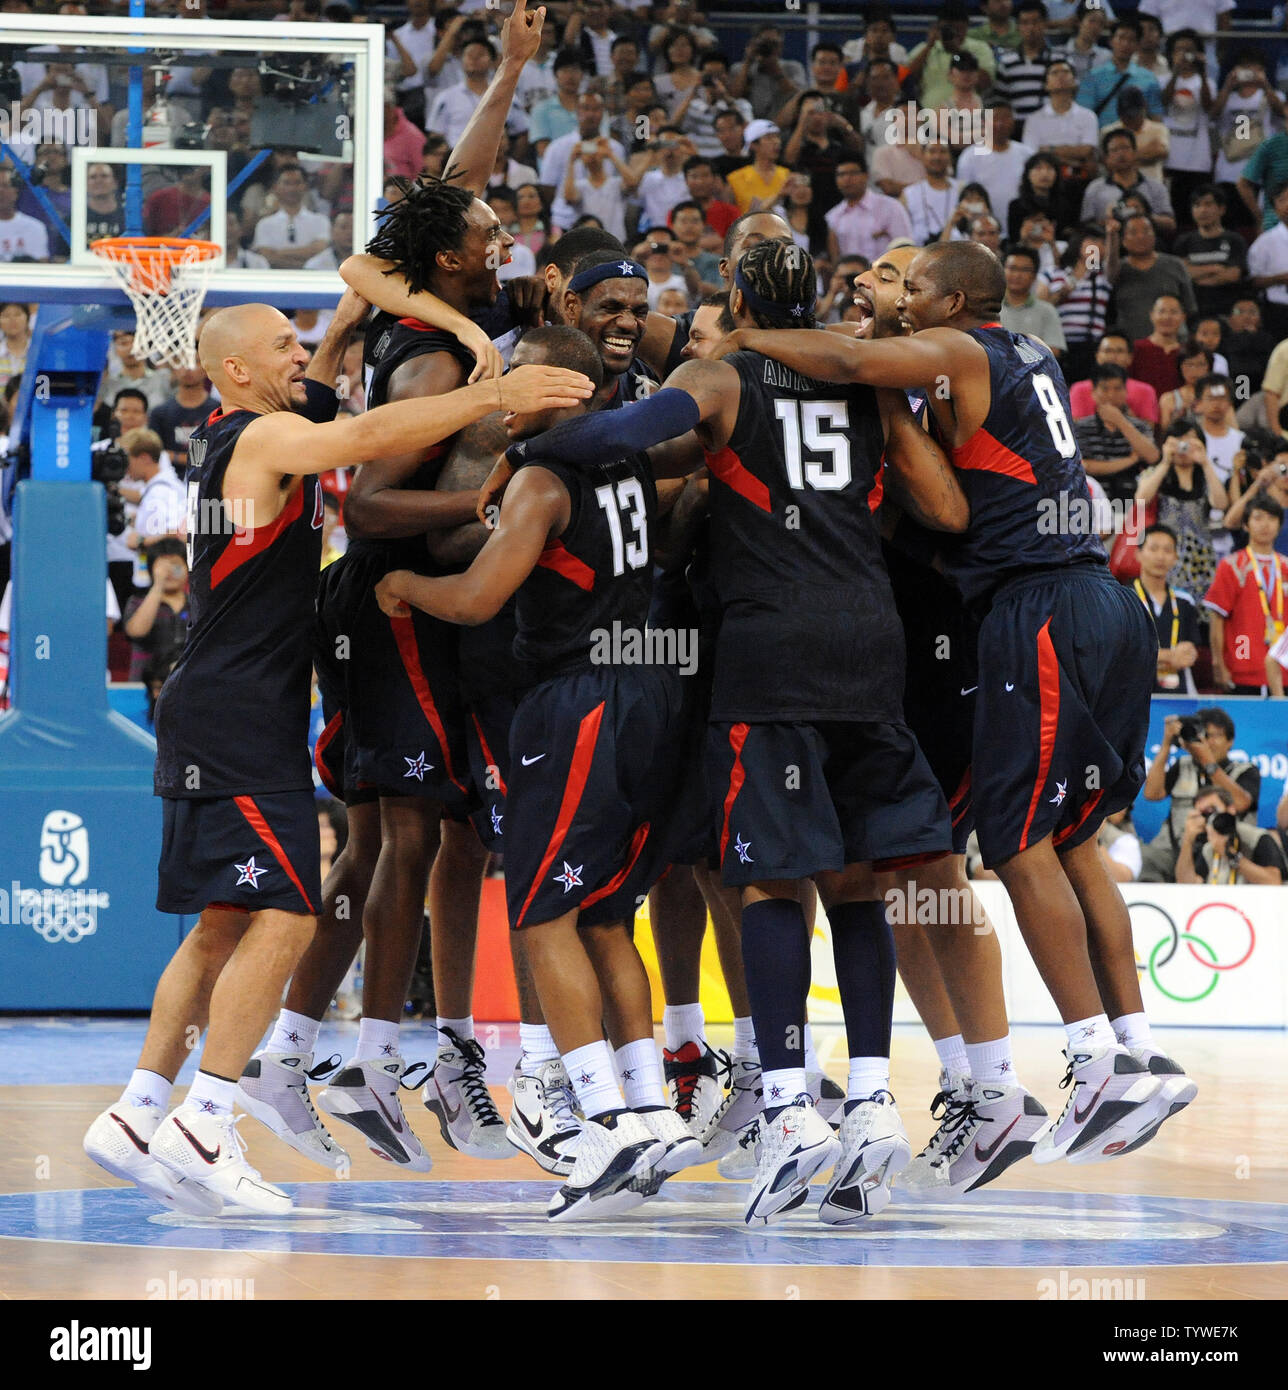 The USA team celebrates their win over Spain to claim the gold medal for  Men's Basketball during the 2008 Summer Olympics in Beijing on August 24,  2008. The US won 118 to